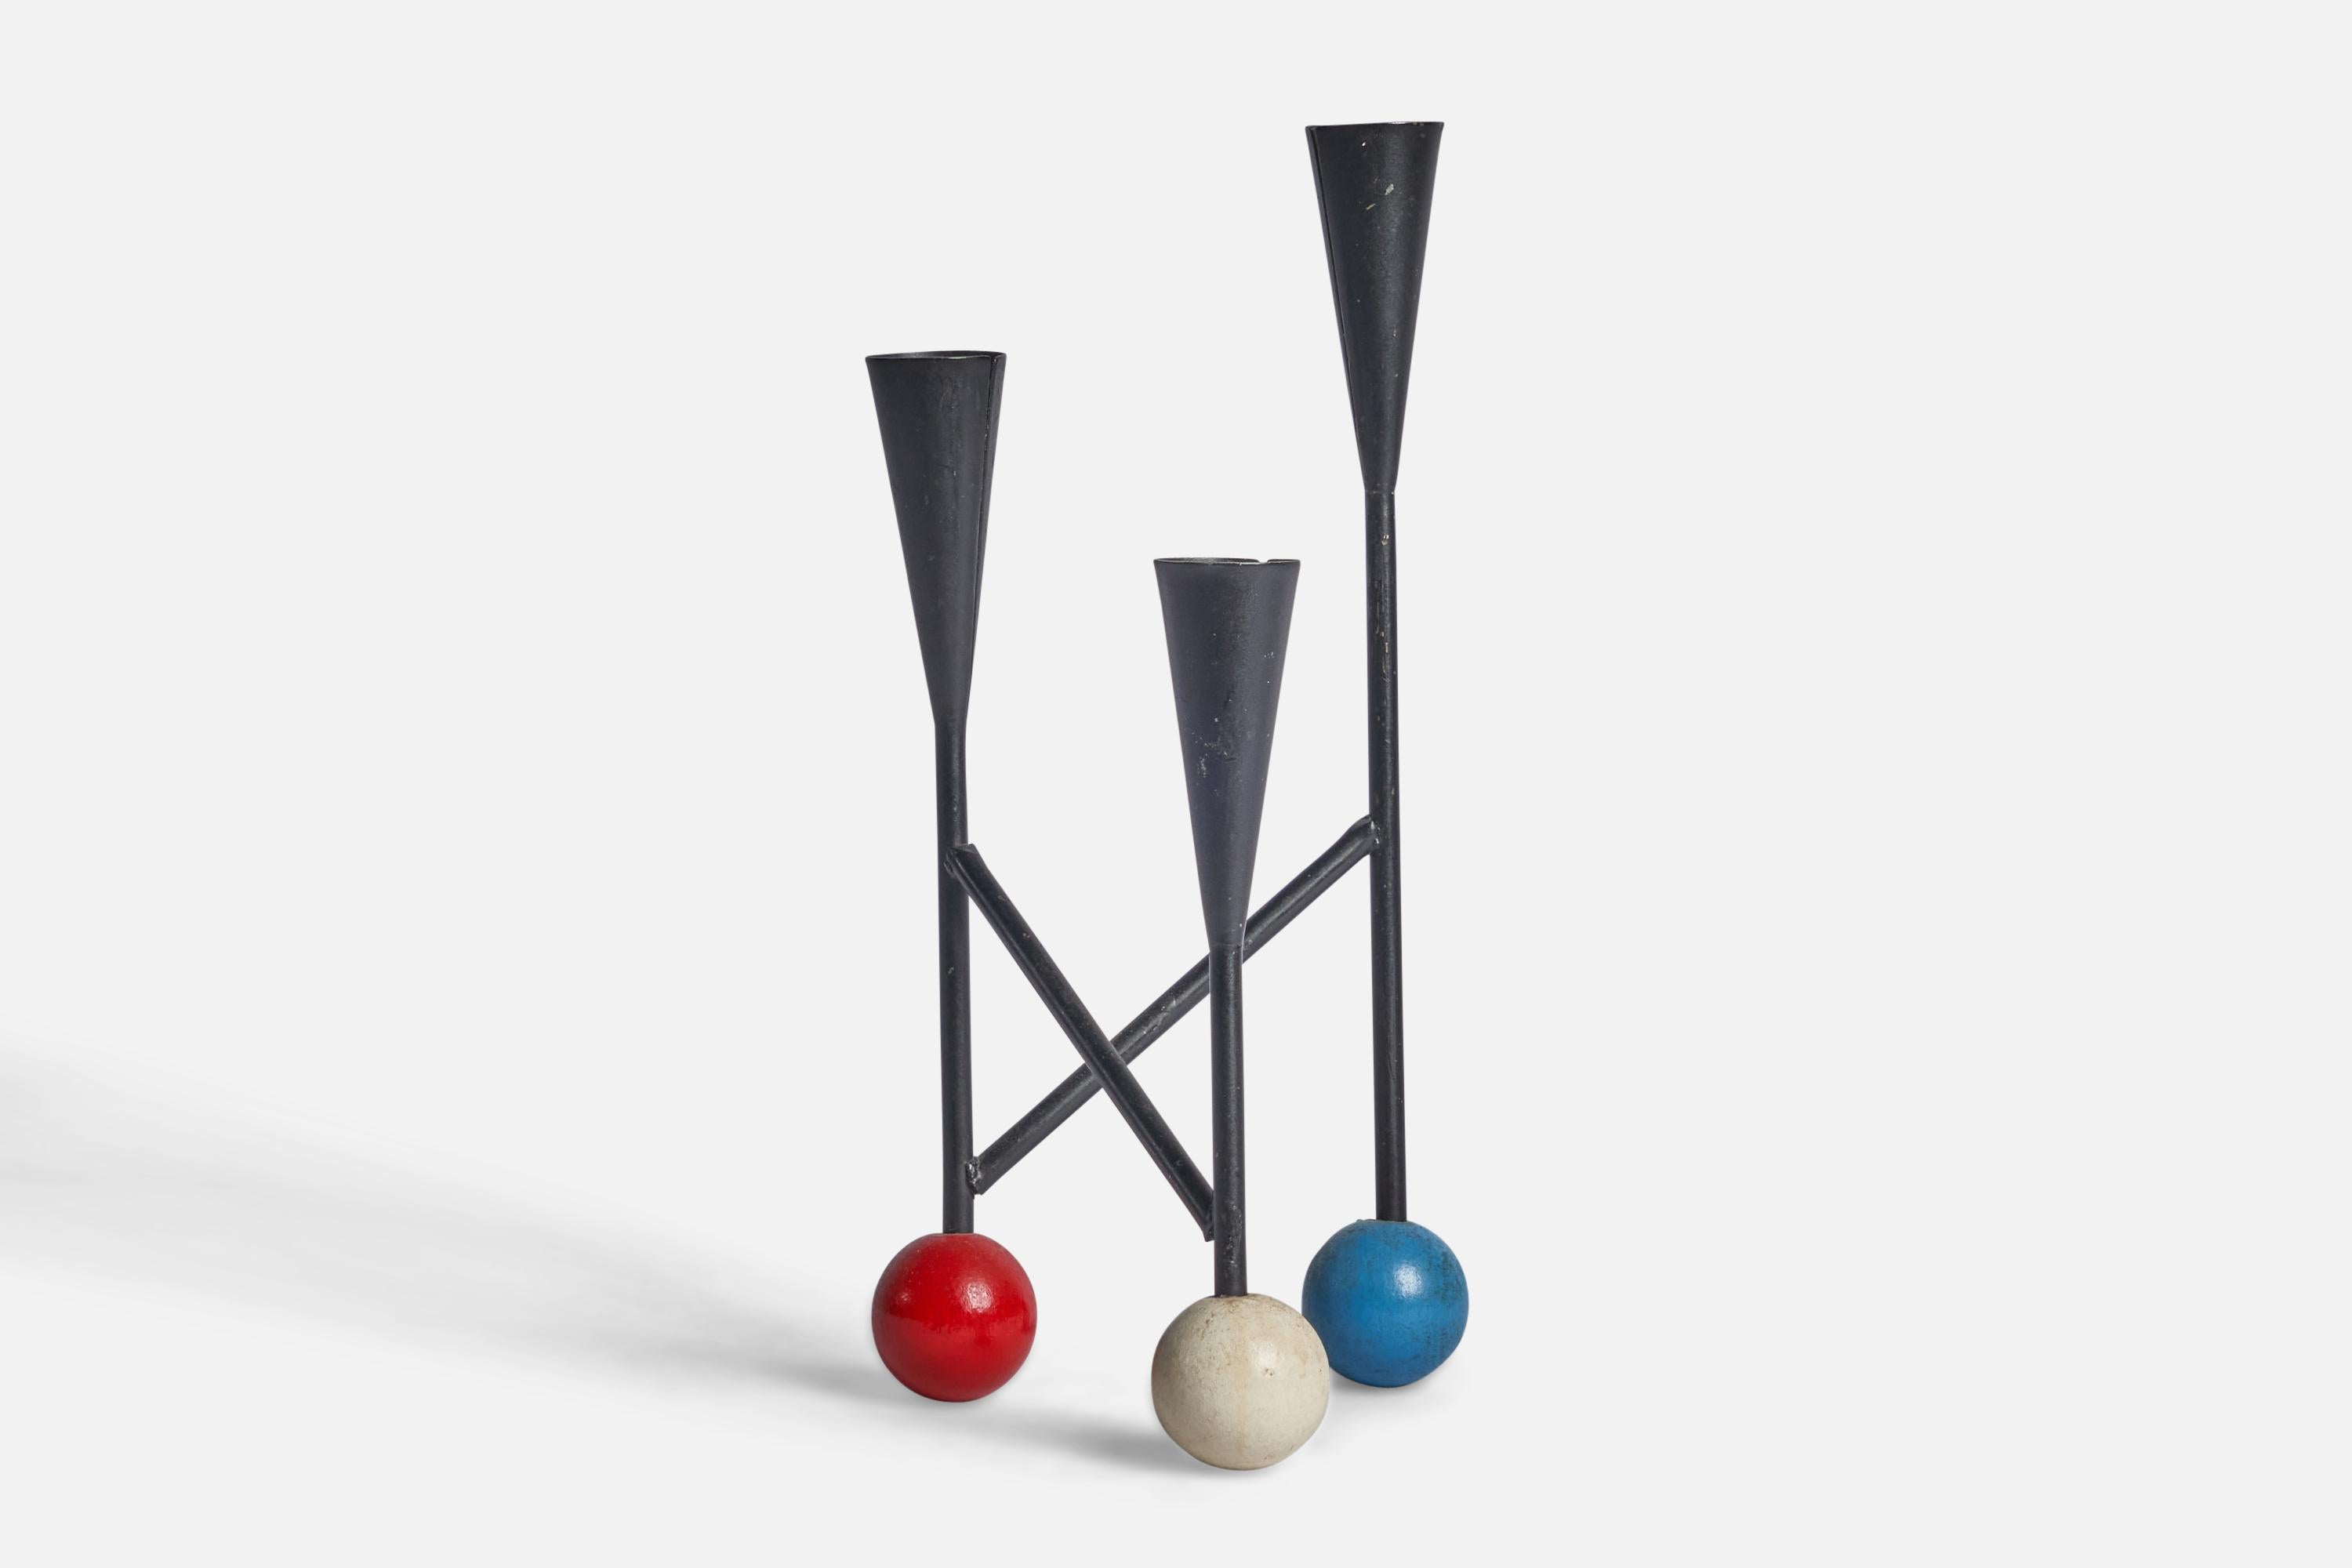 A black-lacquered metal and white, red and blue lacquered wood candelabra designed and produced in Sweden, c. 1950s.
fits 0.8” diameter candles